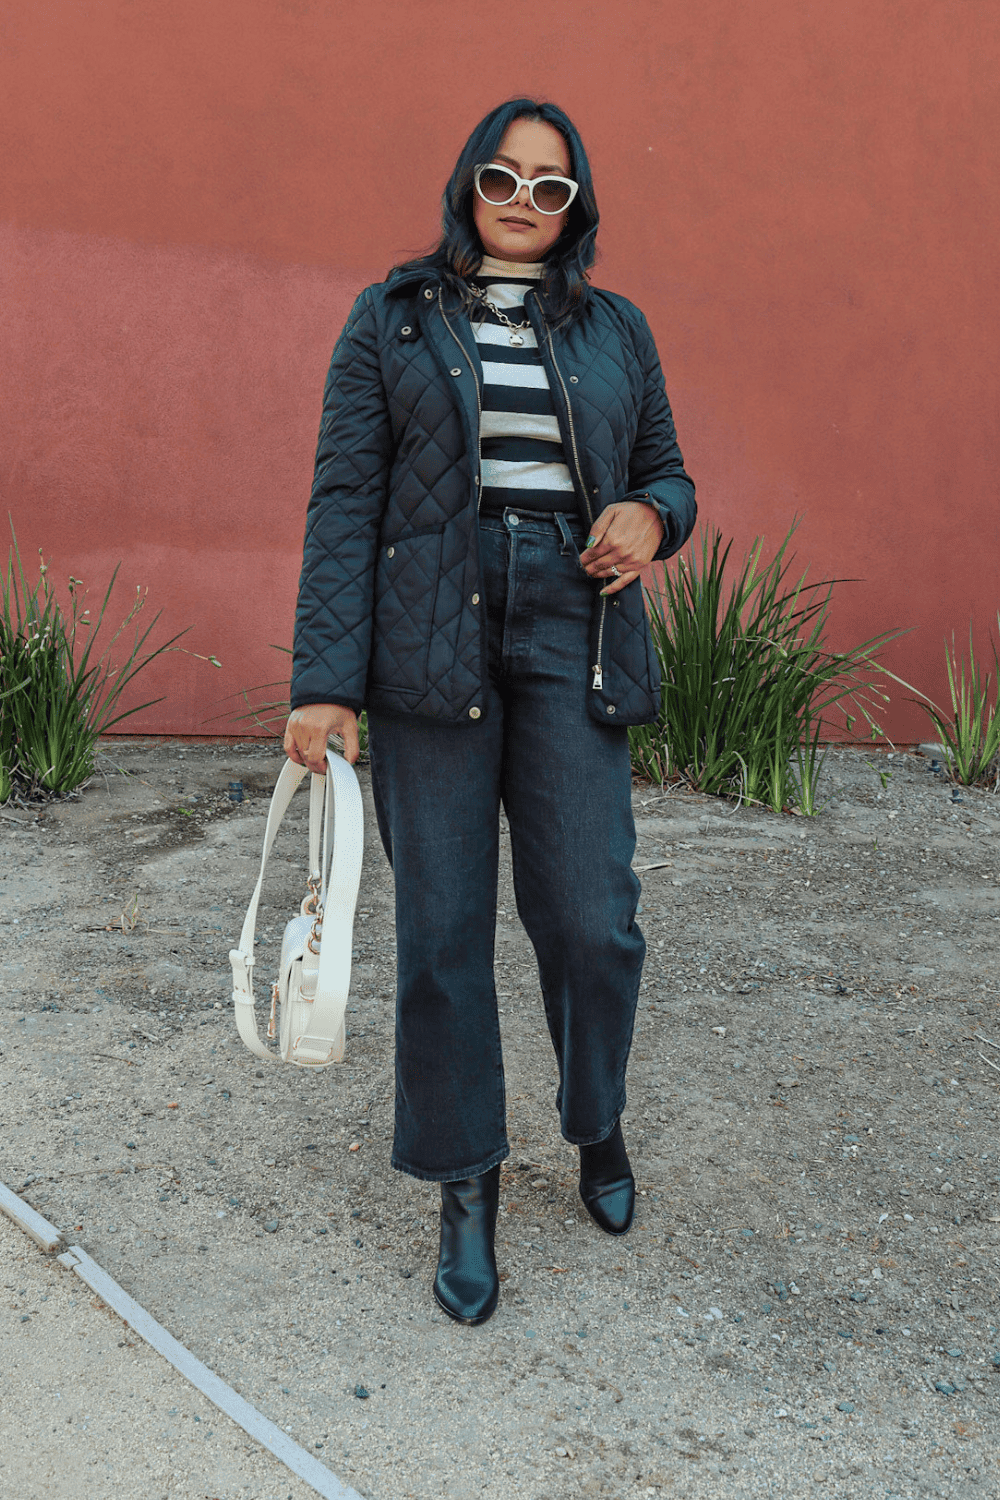 Millennial Striped Top Outfit formula for fall with quilted jacket